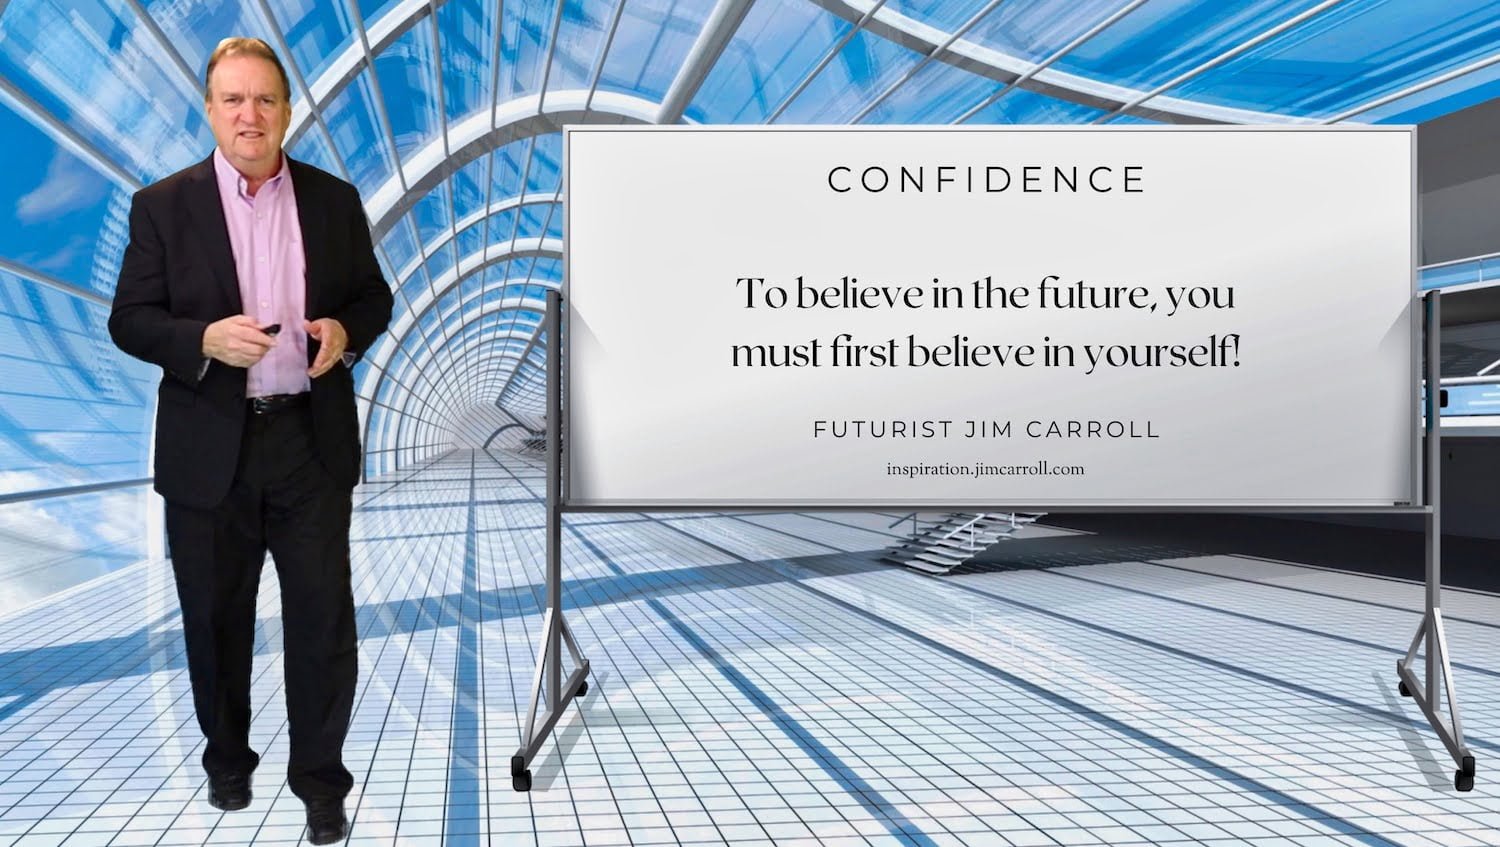 Daily Inspiration: "To believe in the future, you must first believe in yourself!"